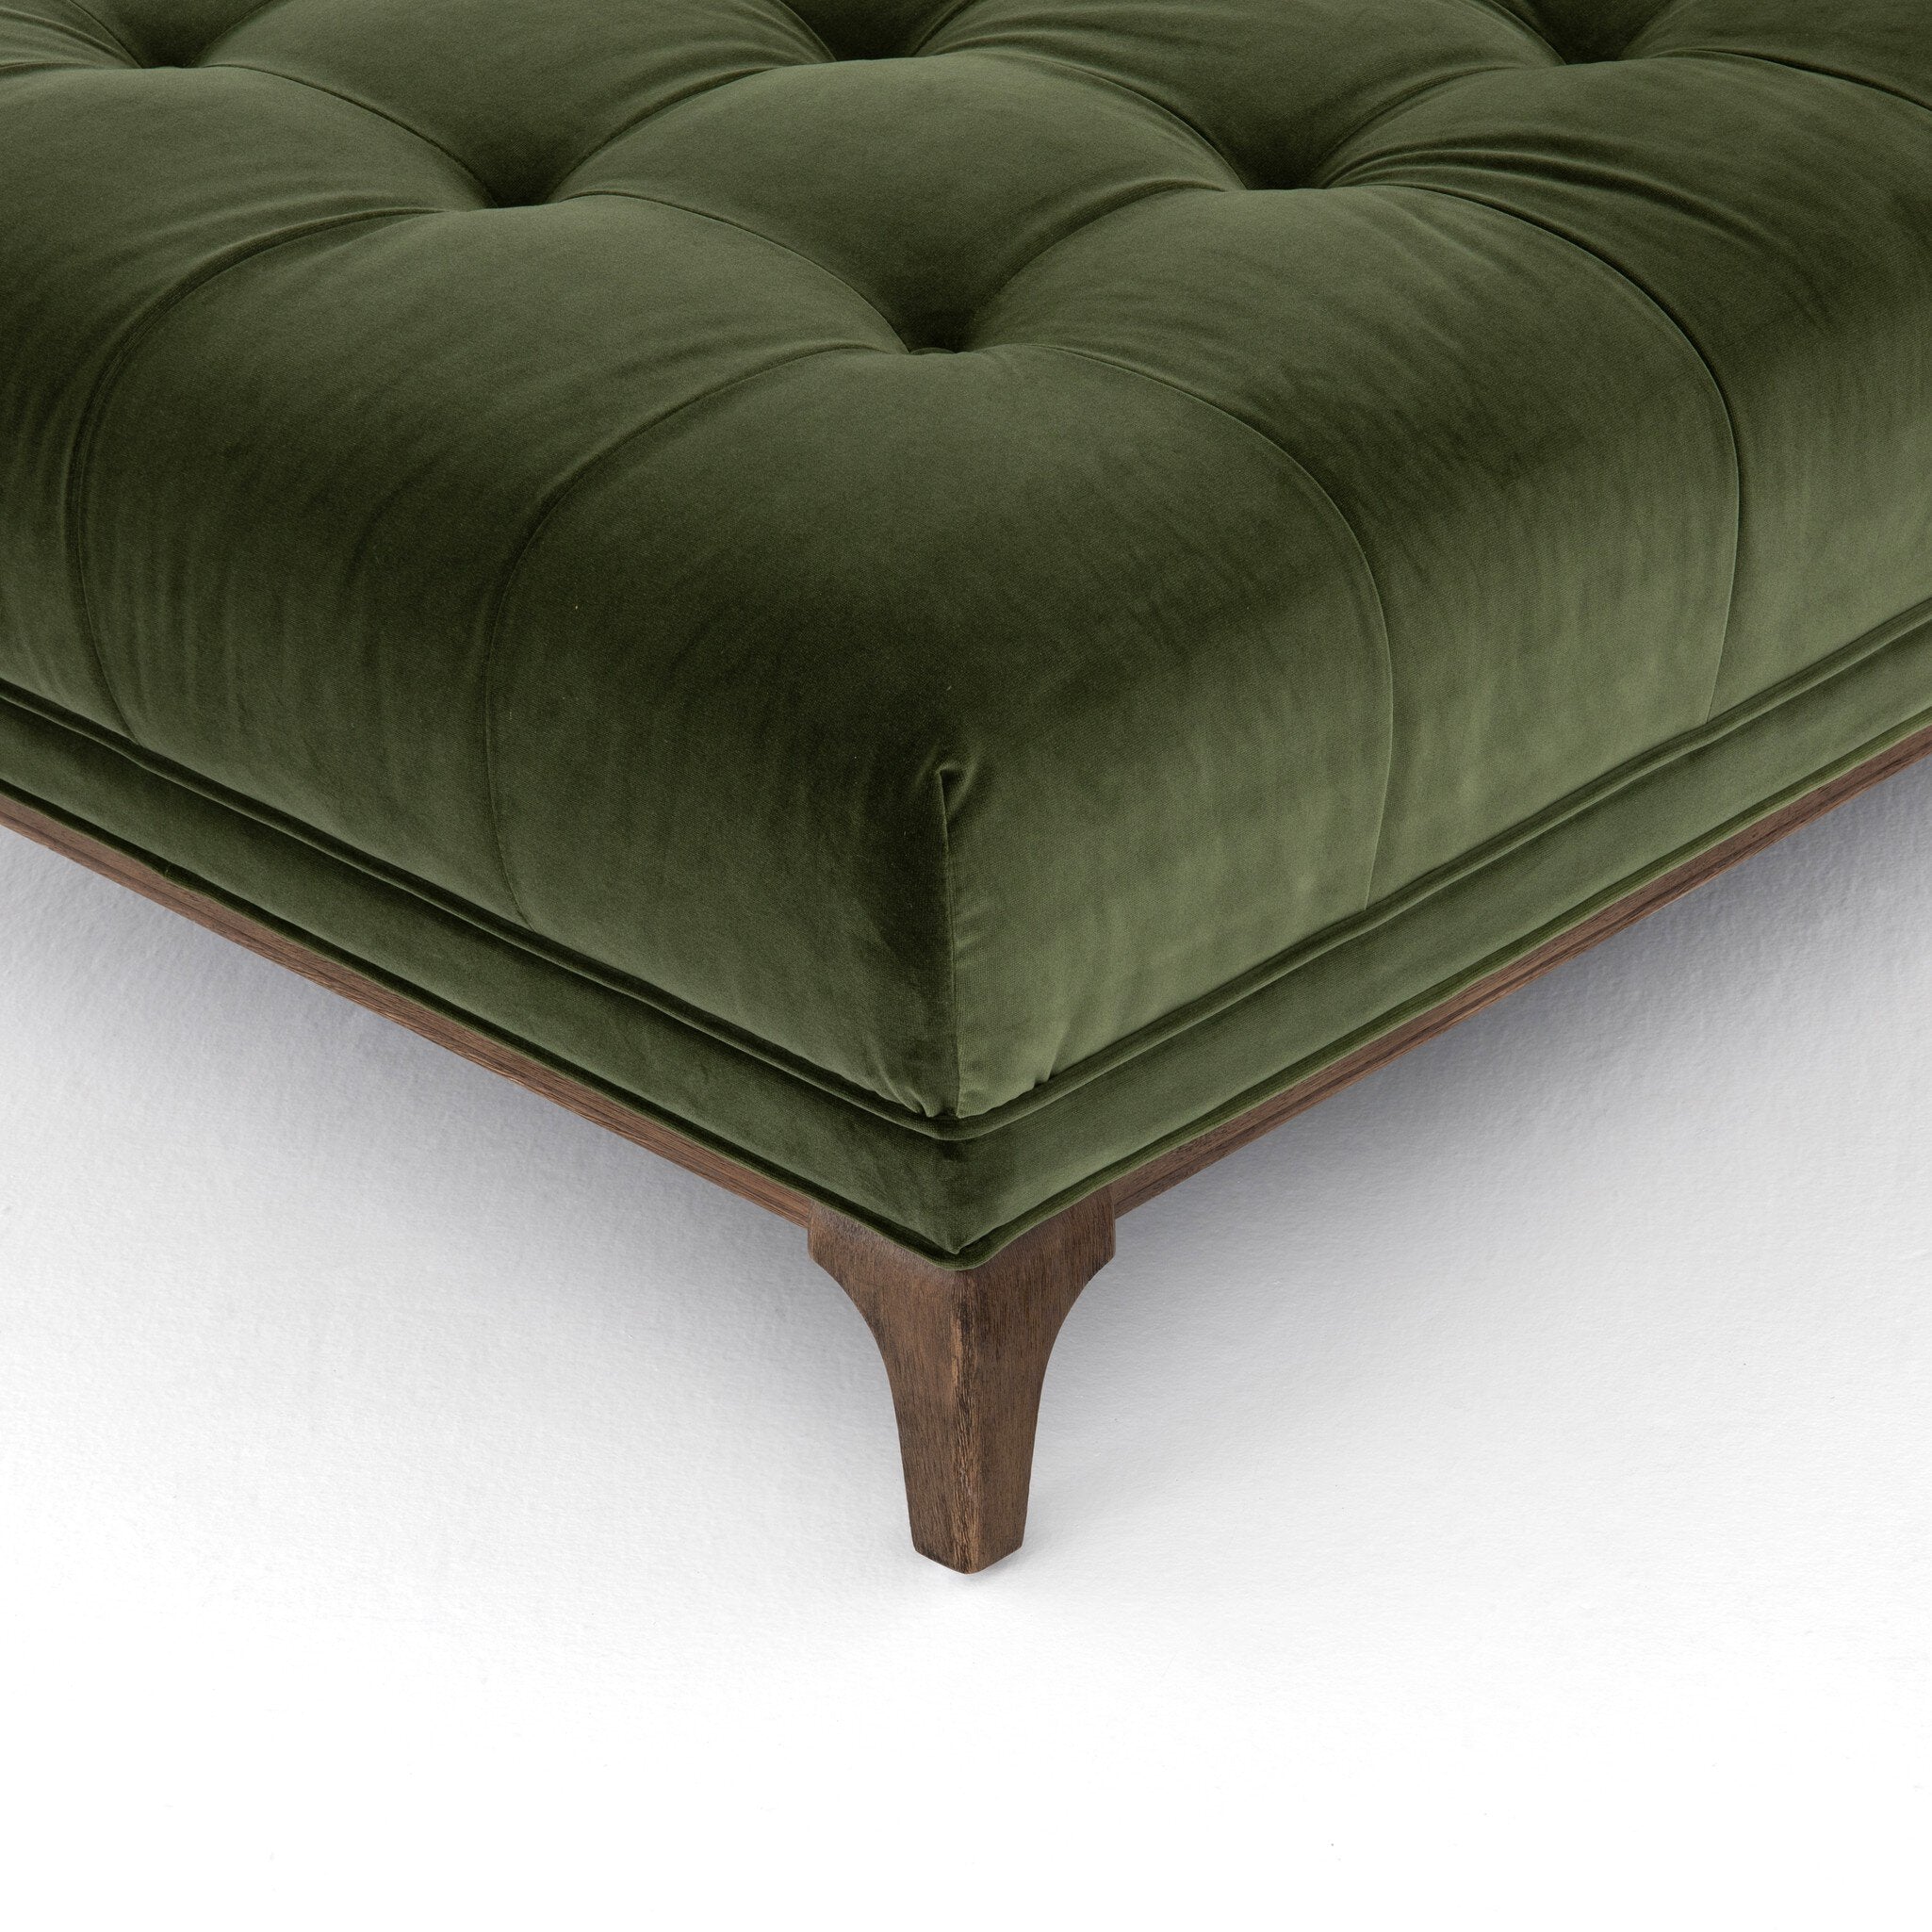 Dylan Chaise Lounge - Sapphire Olive